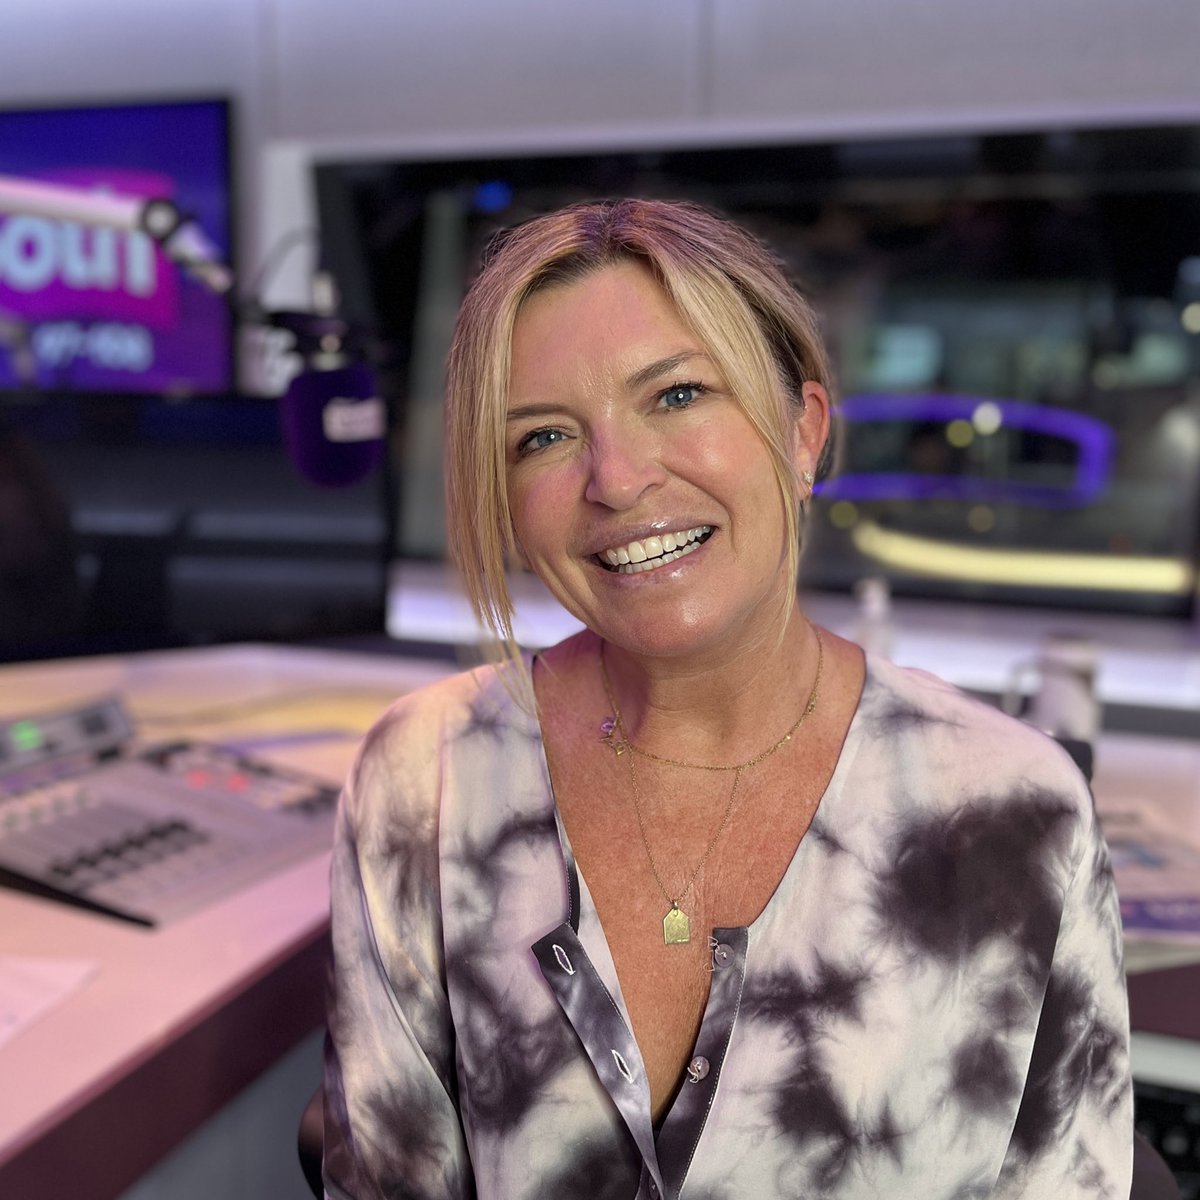 Add a relaxing soundtrack to your lunch break with @TinaHobley this Wednesday! Listen now on @GlobalPlayer 🎶